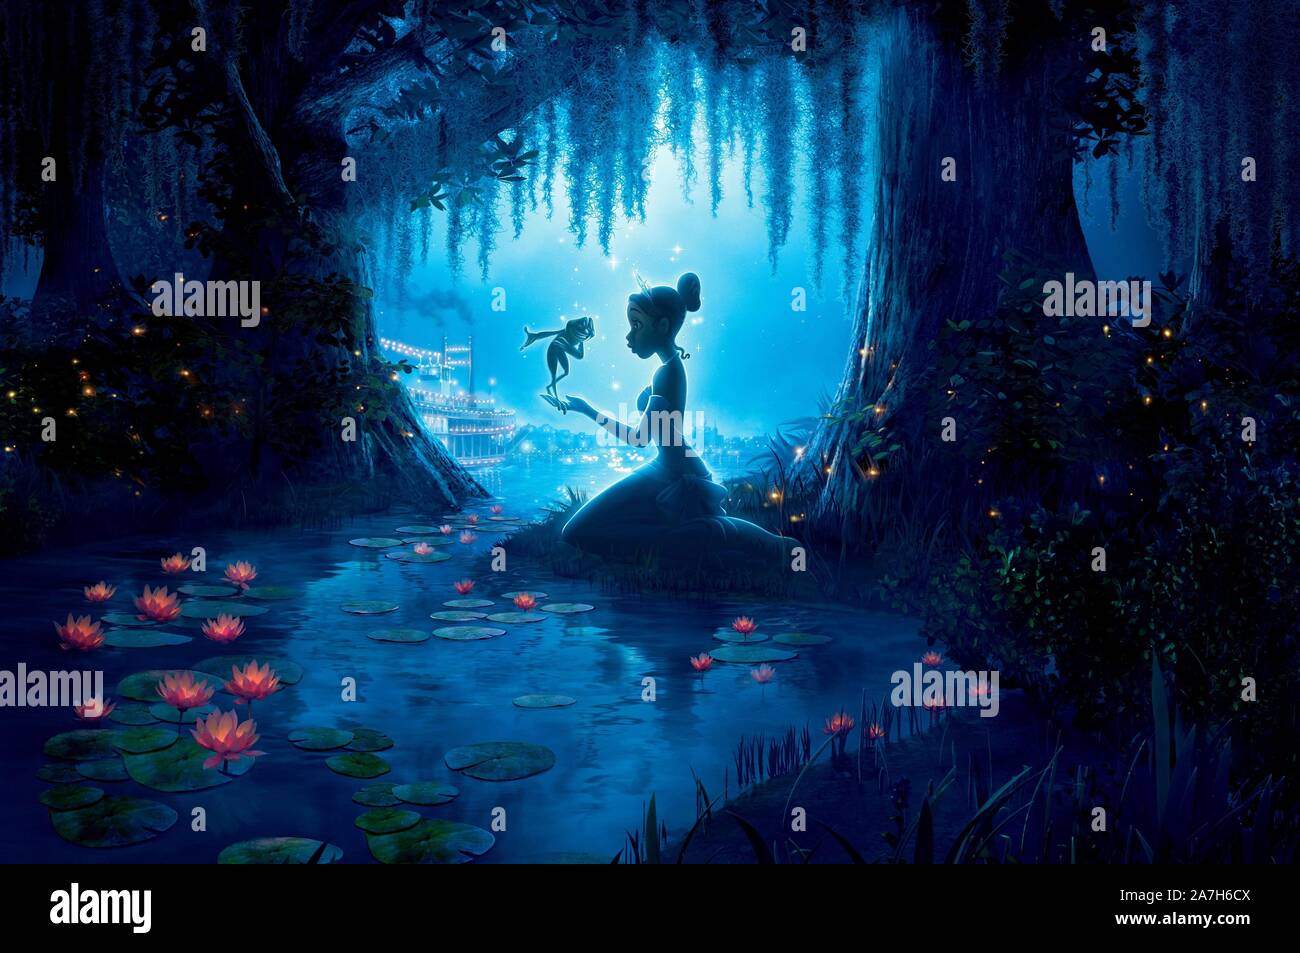 THE FROG PRINCESS (2009) -Original title: THE PRINCESS AND THE FROG-, directed by JOHN MUSKER and RON CLEMENTS. Credit: WALT DISNEY PICTURES / Album Stock Photo